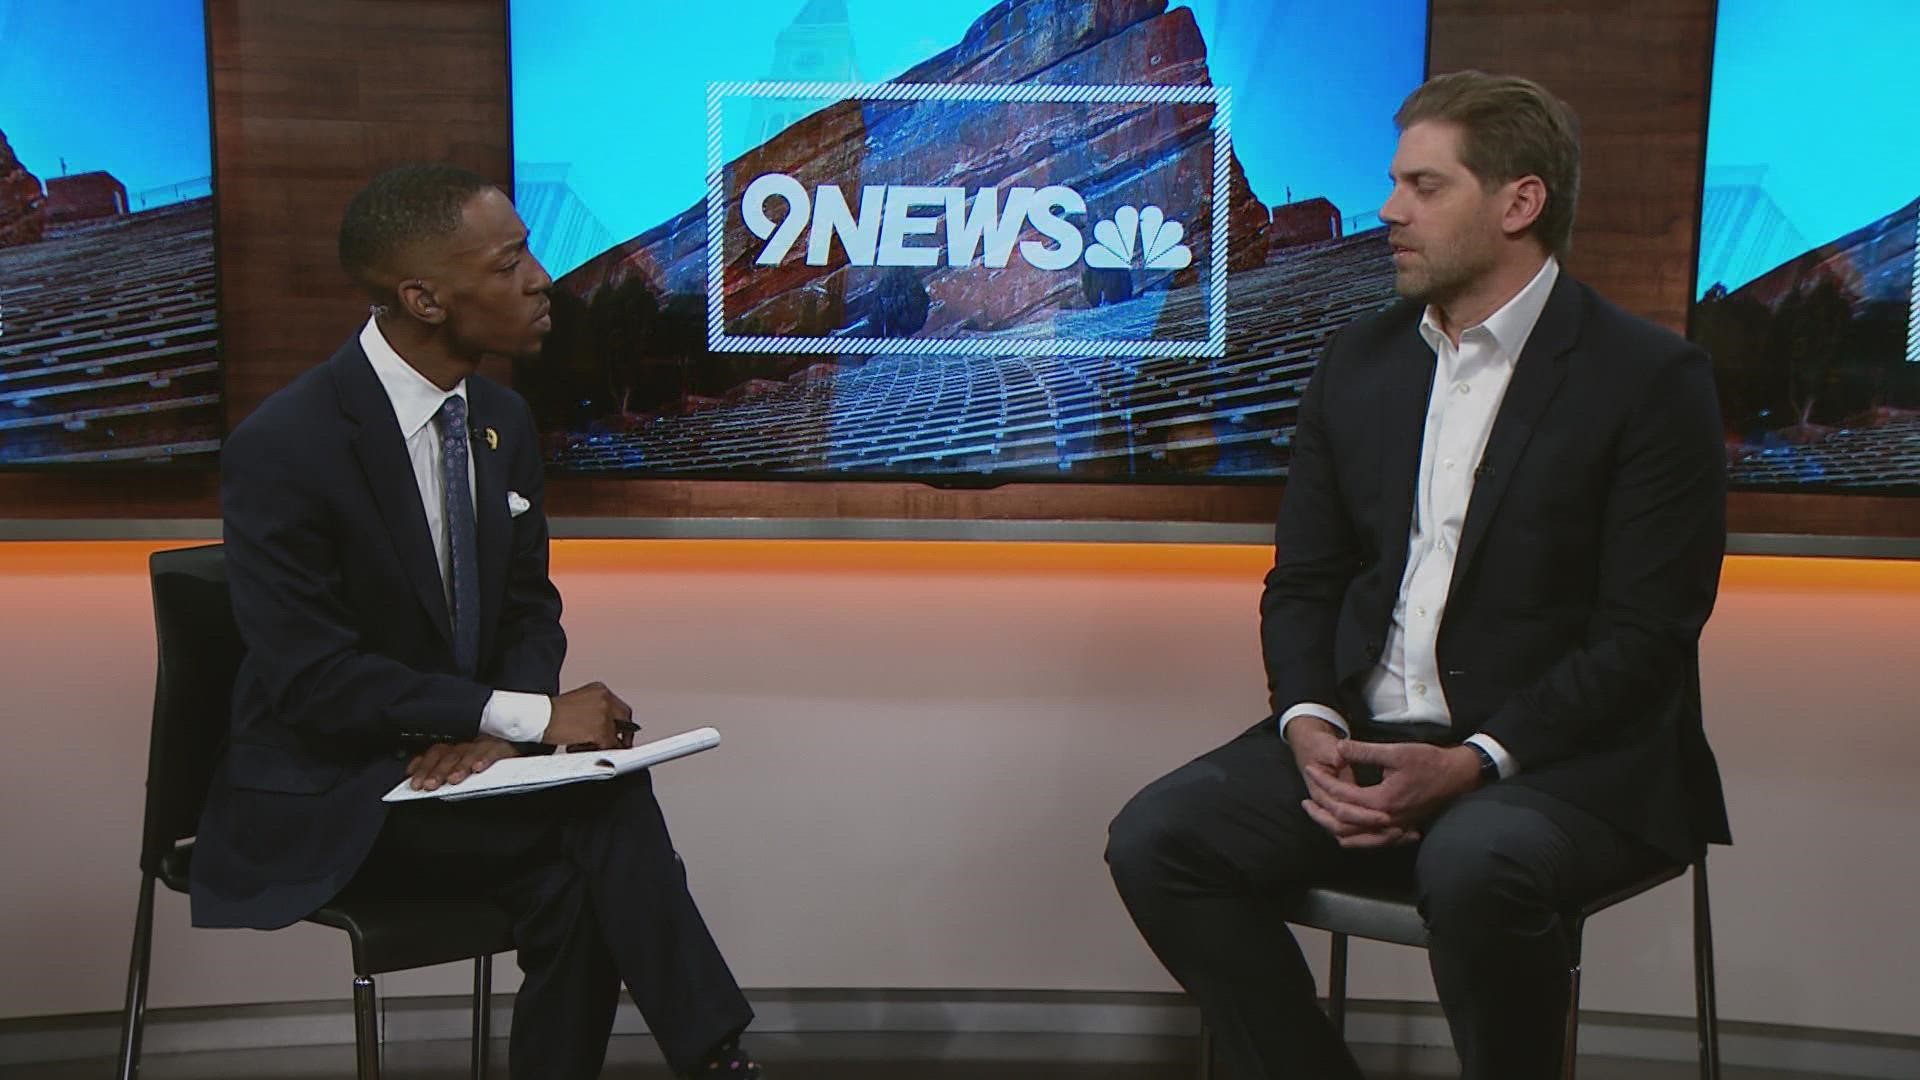 Colorado is getting $21 million from the feds to fight the opioid crisis. Executive Clinical Director with Gallus Medical Detox talks more about what that means.